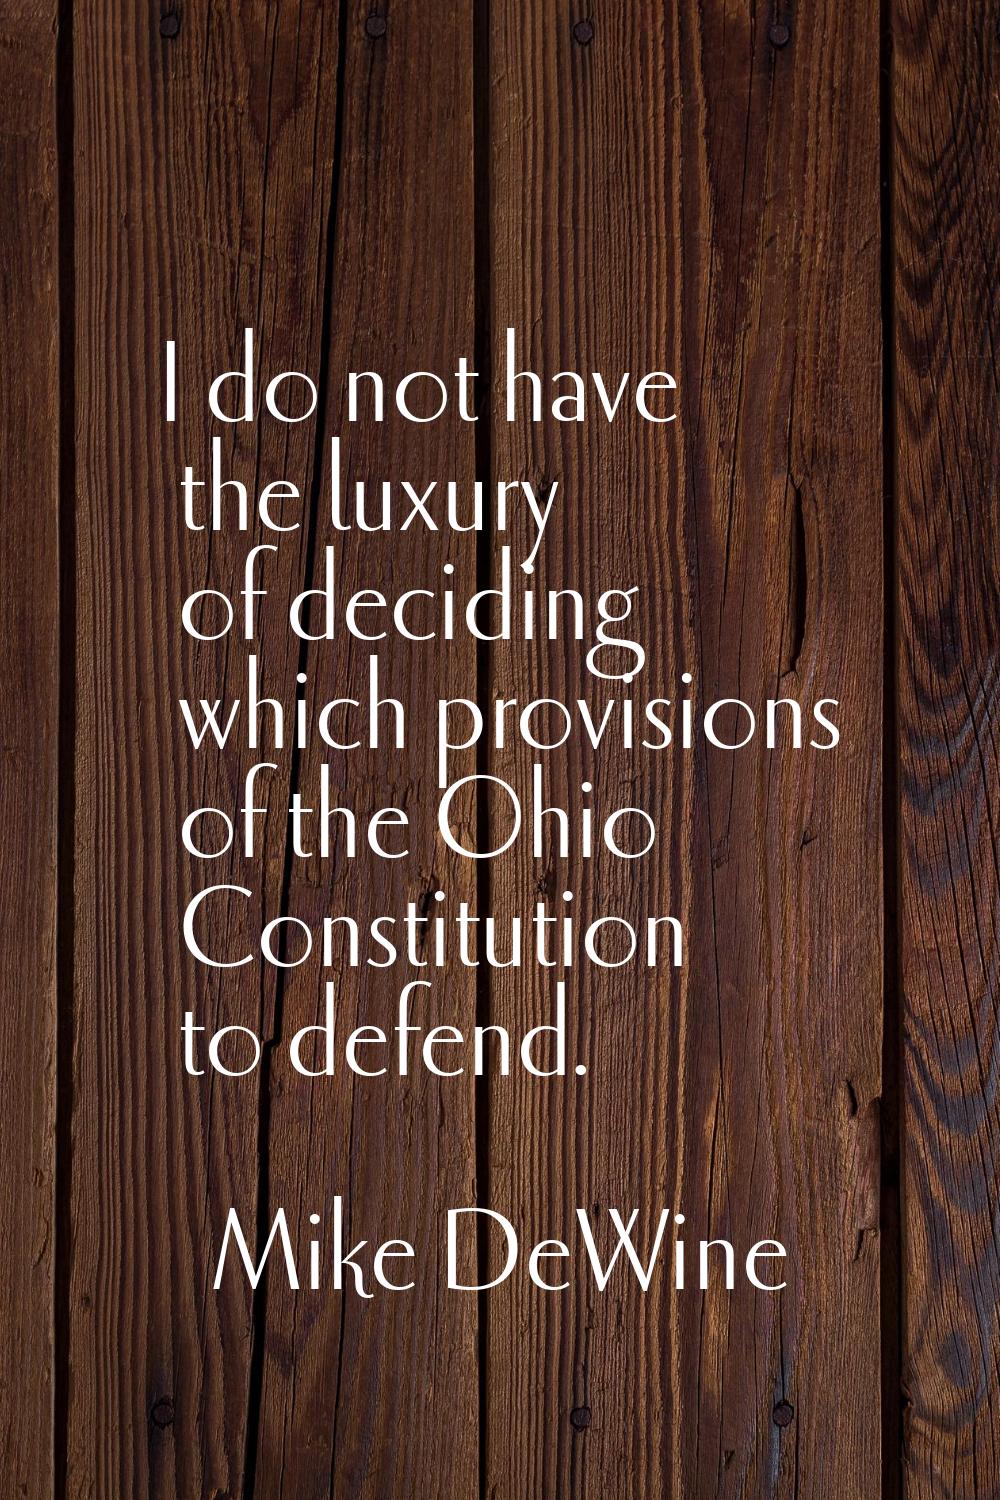 I do not have the luxury of deciding which provisions of the Ohio Constitution to defend.